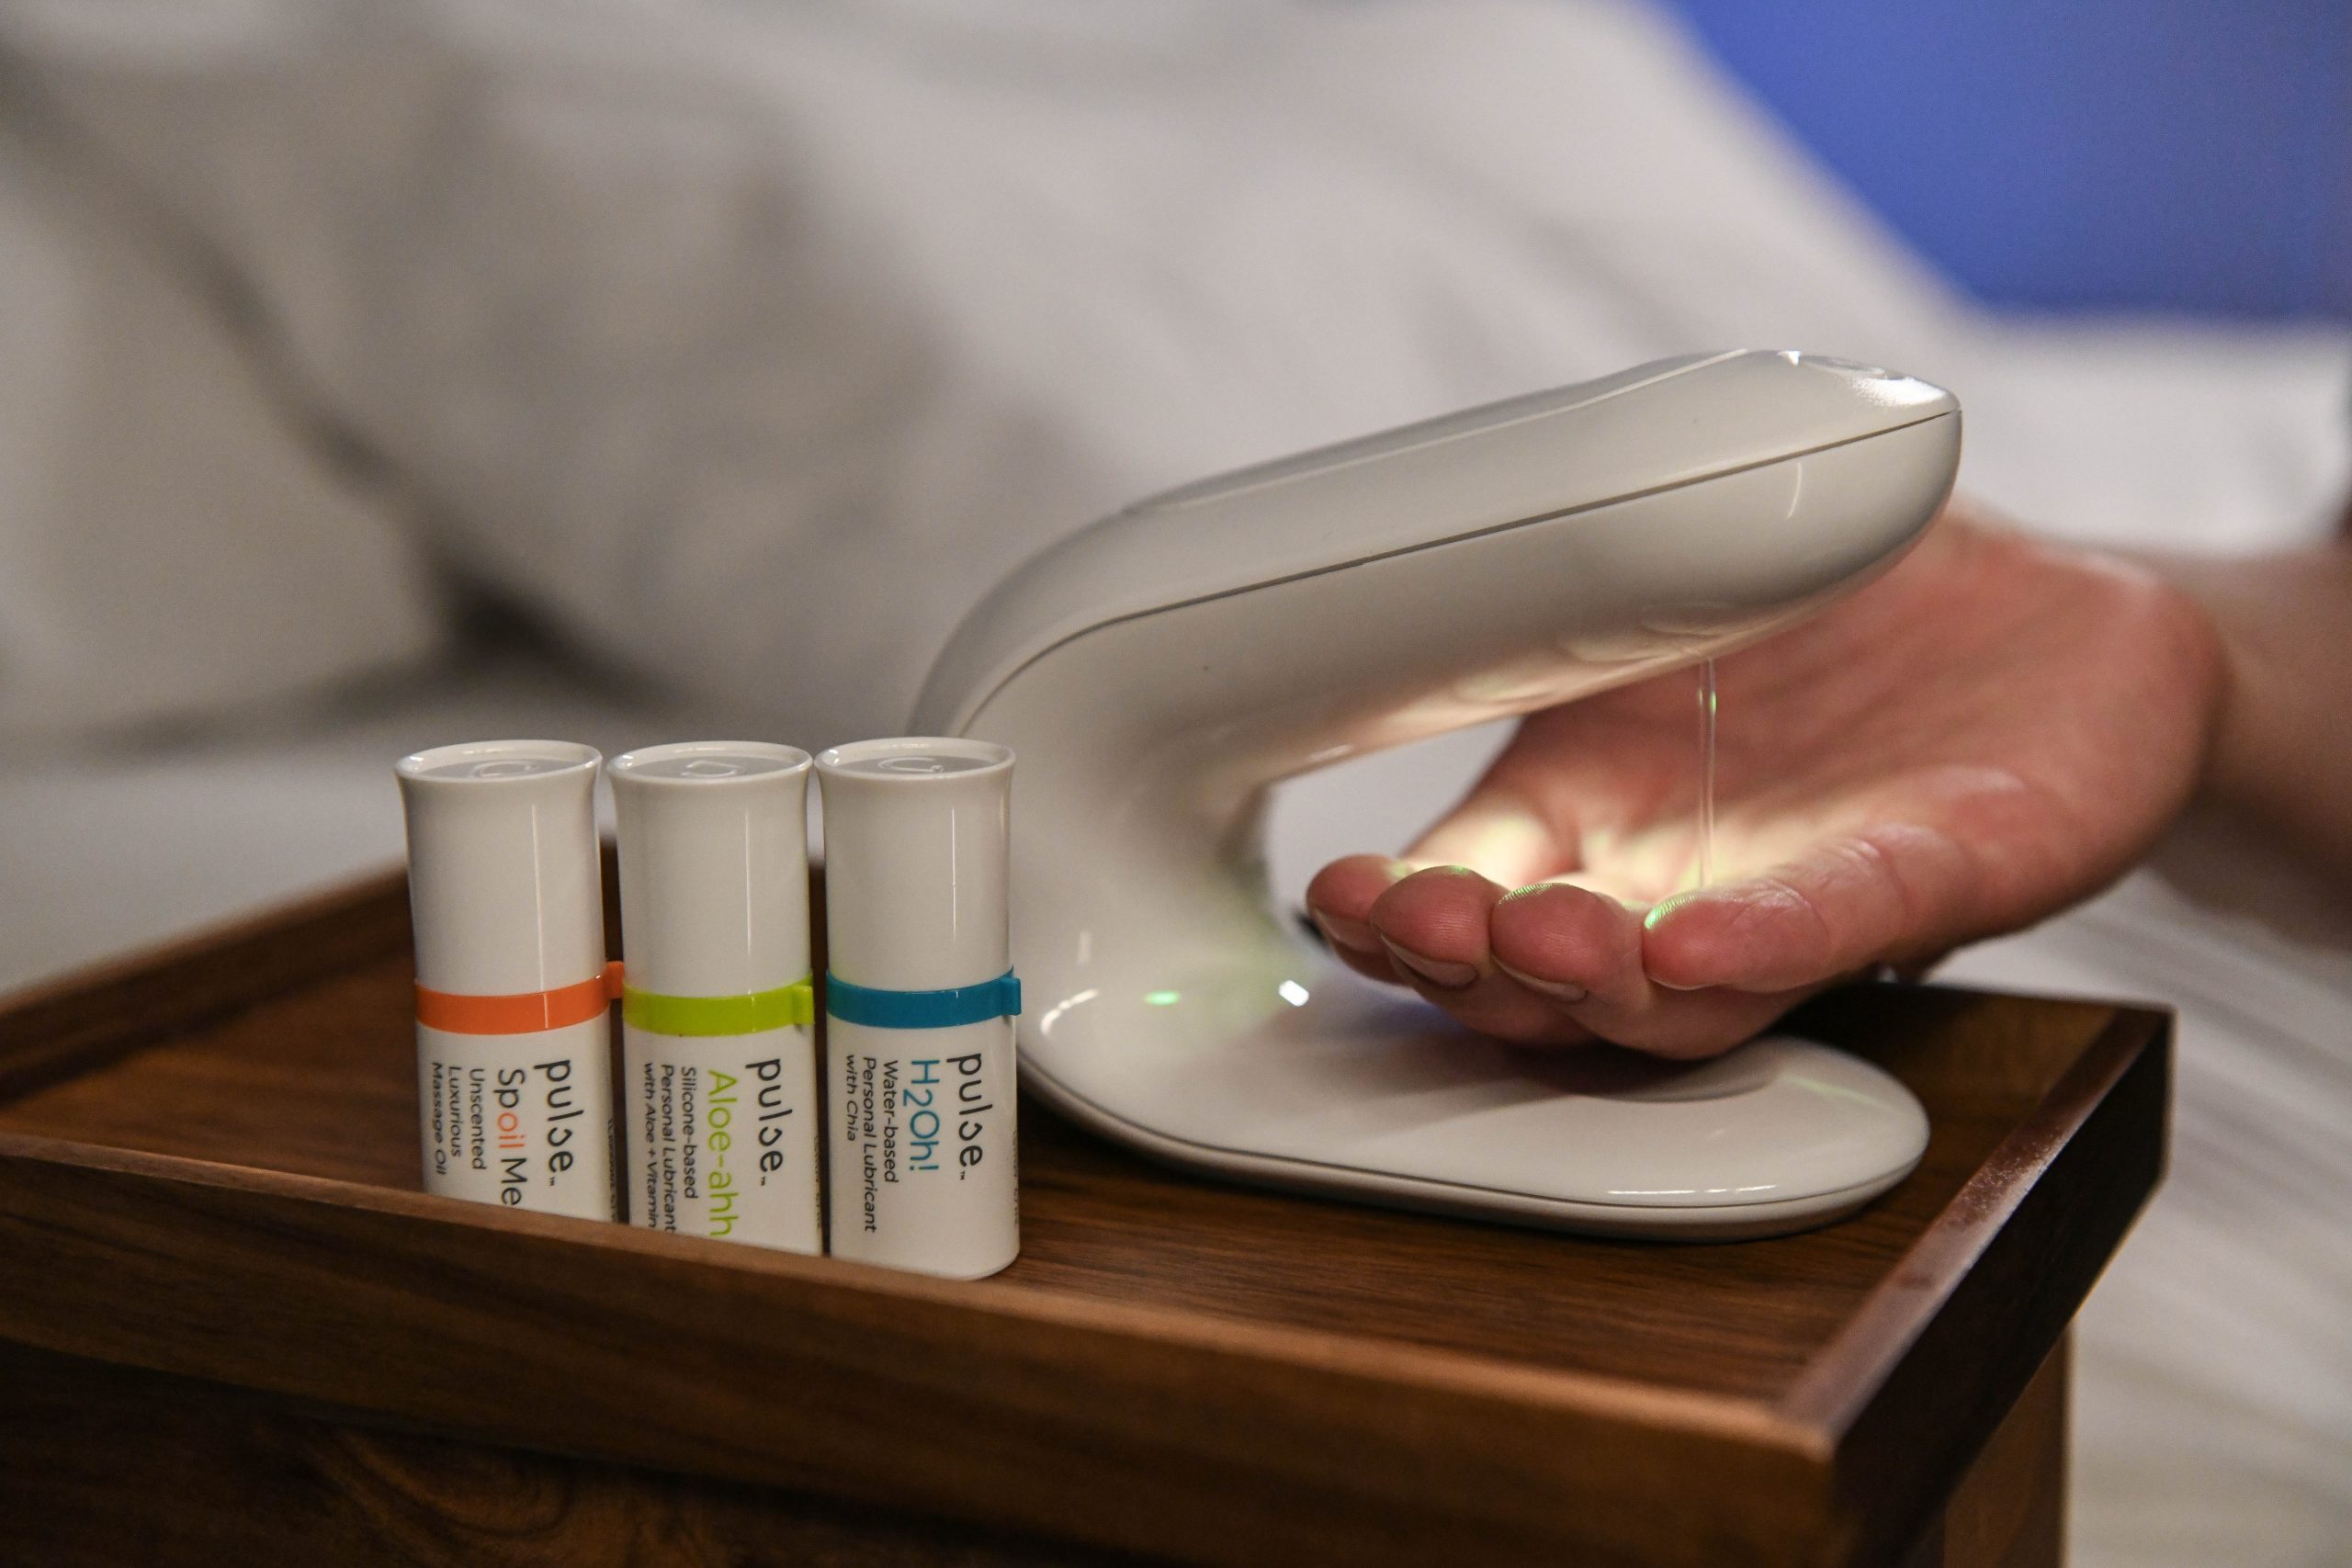 A hand receives liquid from the Pulse Warmer next to massage oil and sexual lubricant pods.